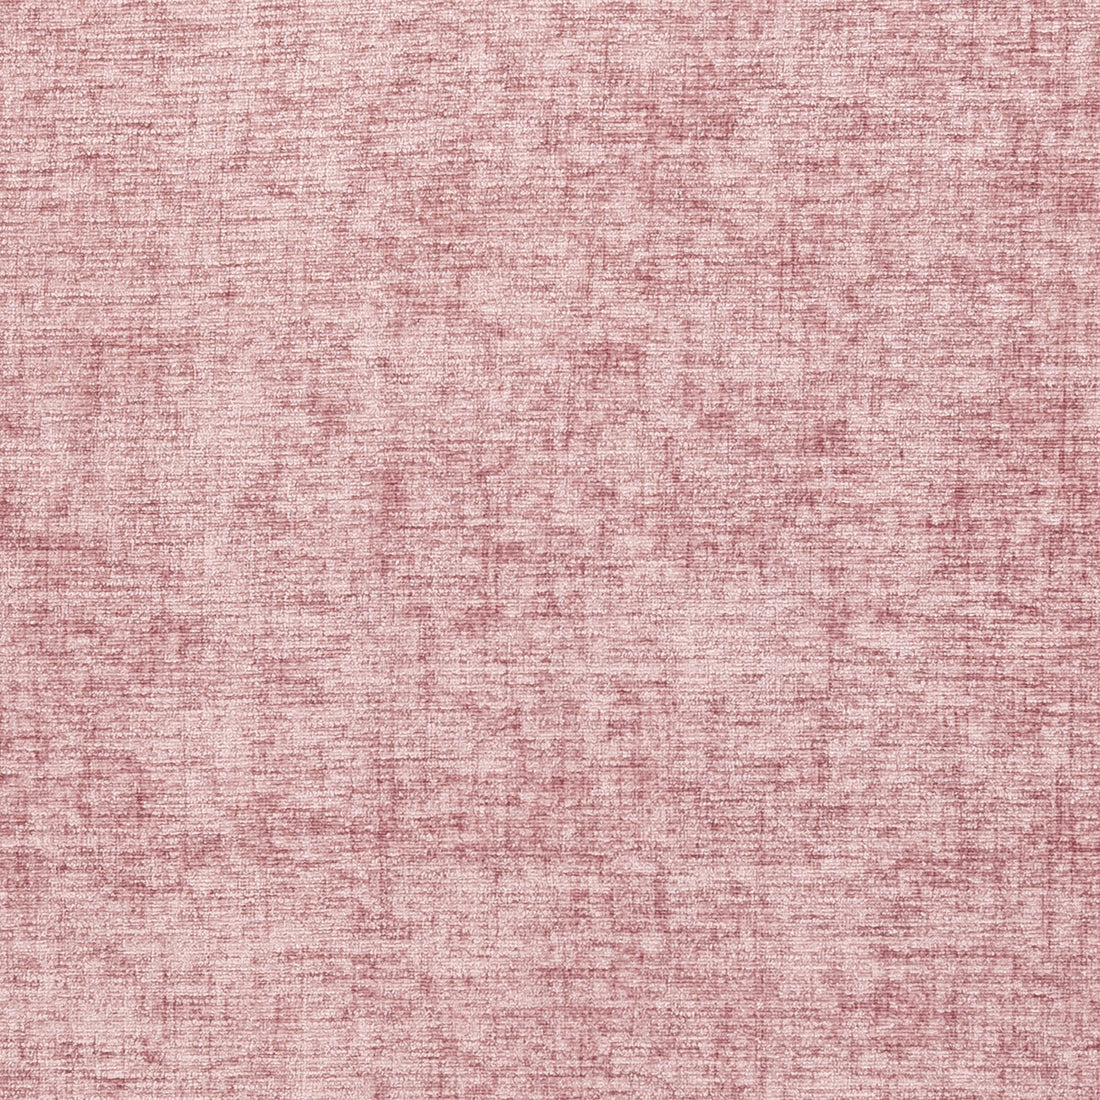 Karina fabric in heather color - pattern F0371/18.CAC.0 - by Clarke And Clarke in the Clarke &amp; Clarke Karina collection